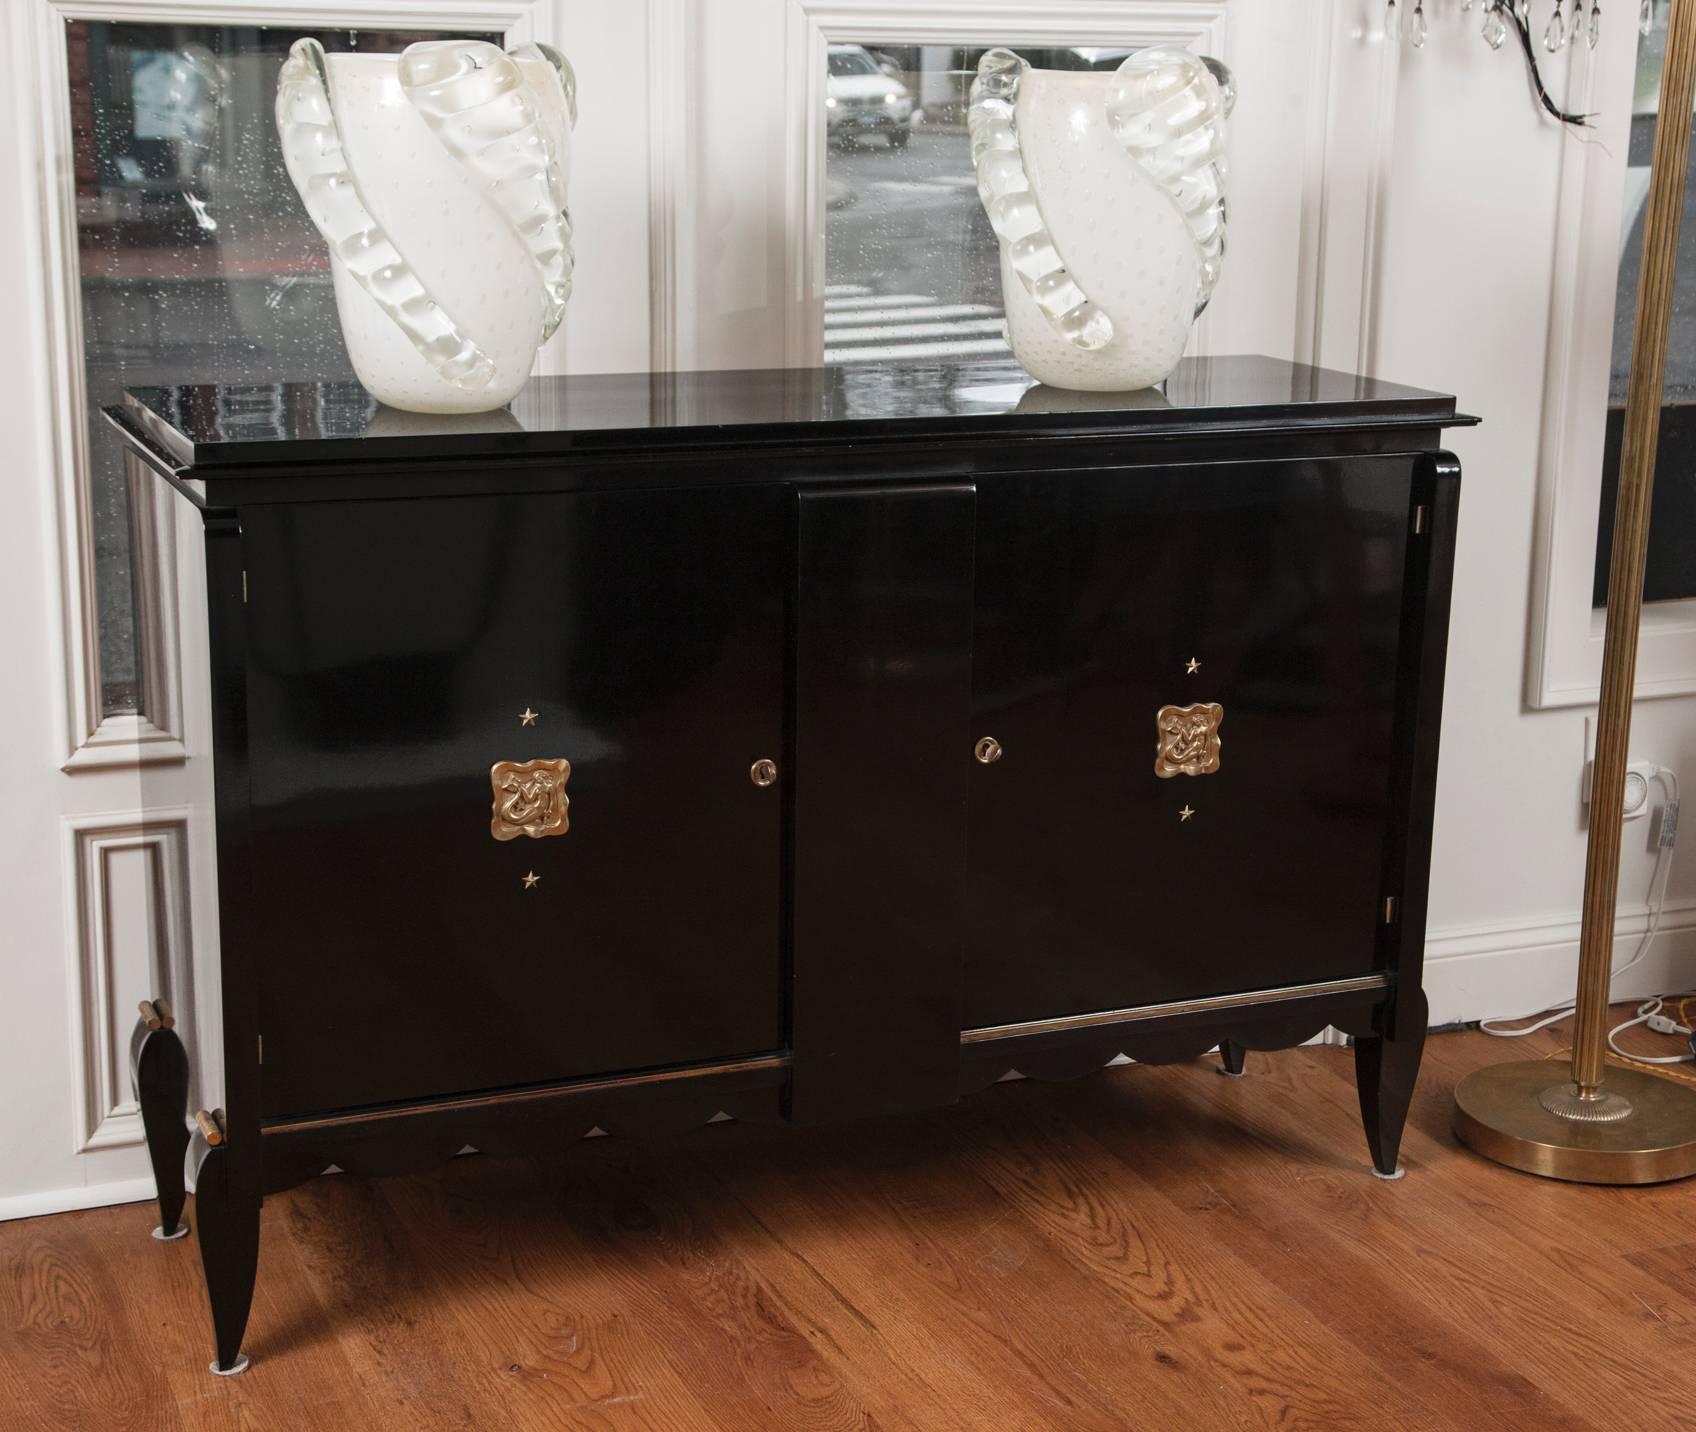 Gorgeous ebonized French sideboard comprised of two doors with curved legs and a scalloped apron, adorned with lovely brass mermaid and star placards, in the style of Leleu, circa 1940. Lacquer hand rubbed.  Interior outfitted with shelves in a